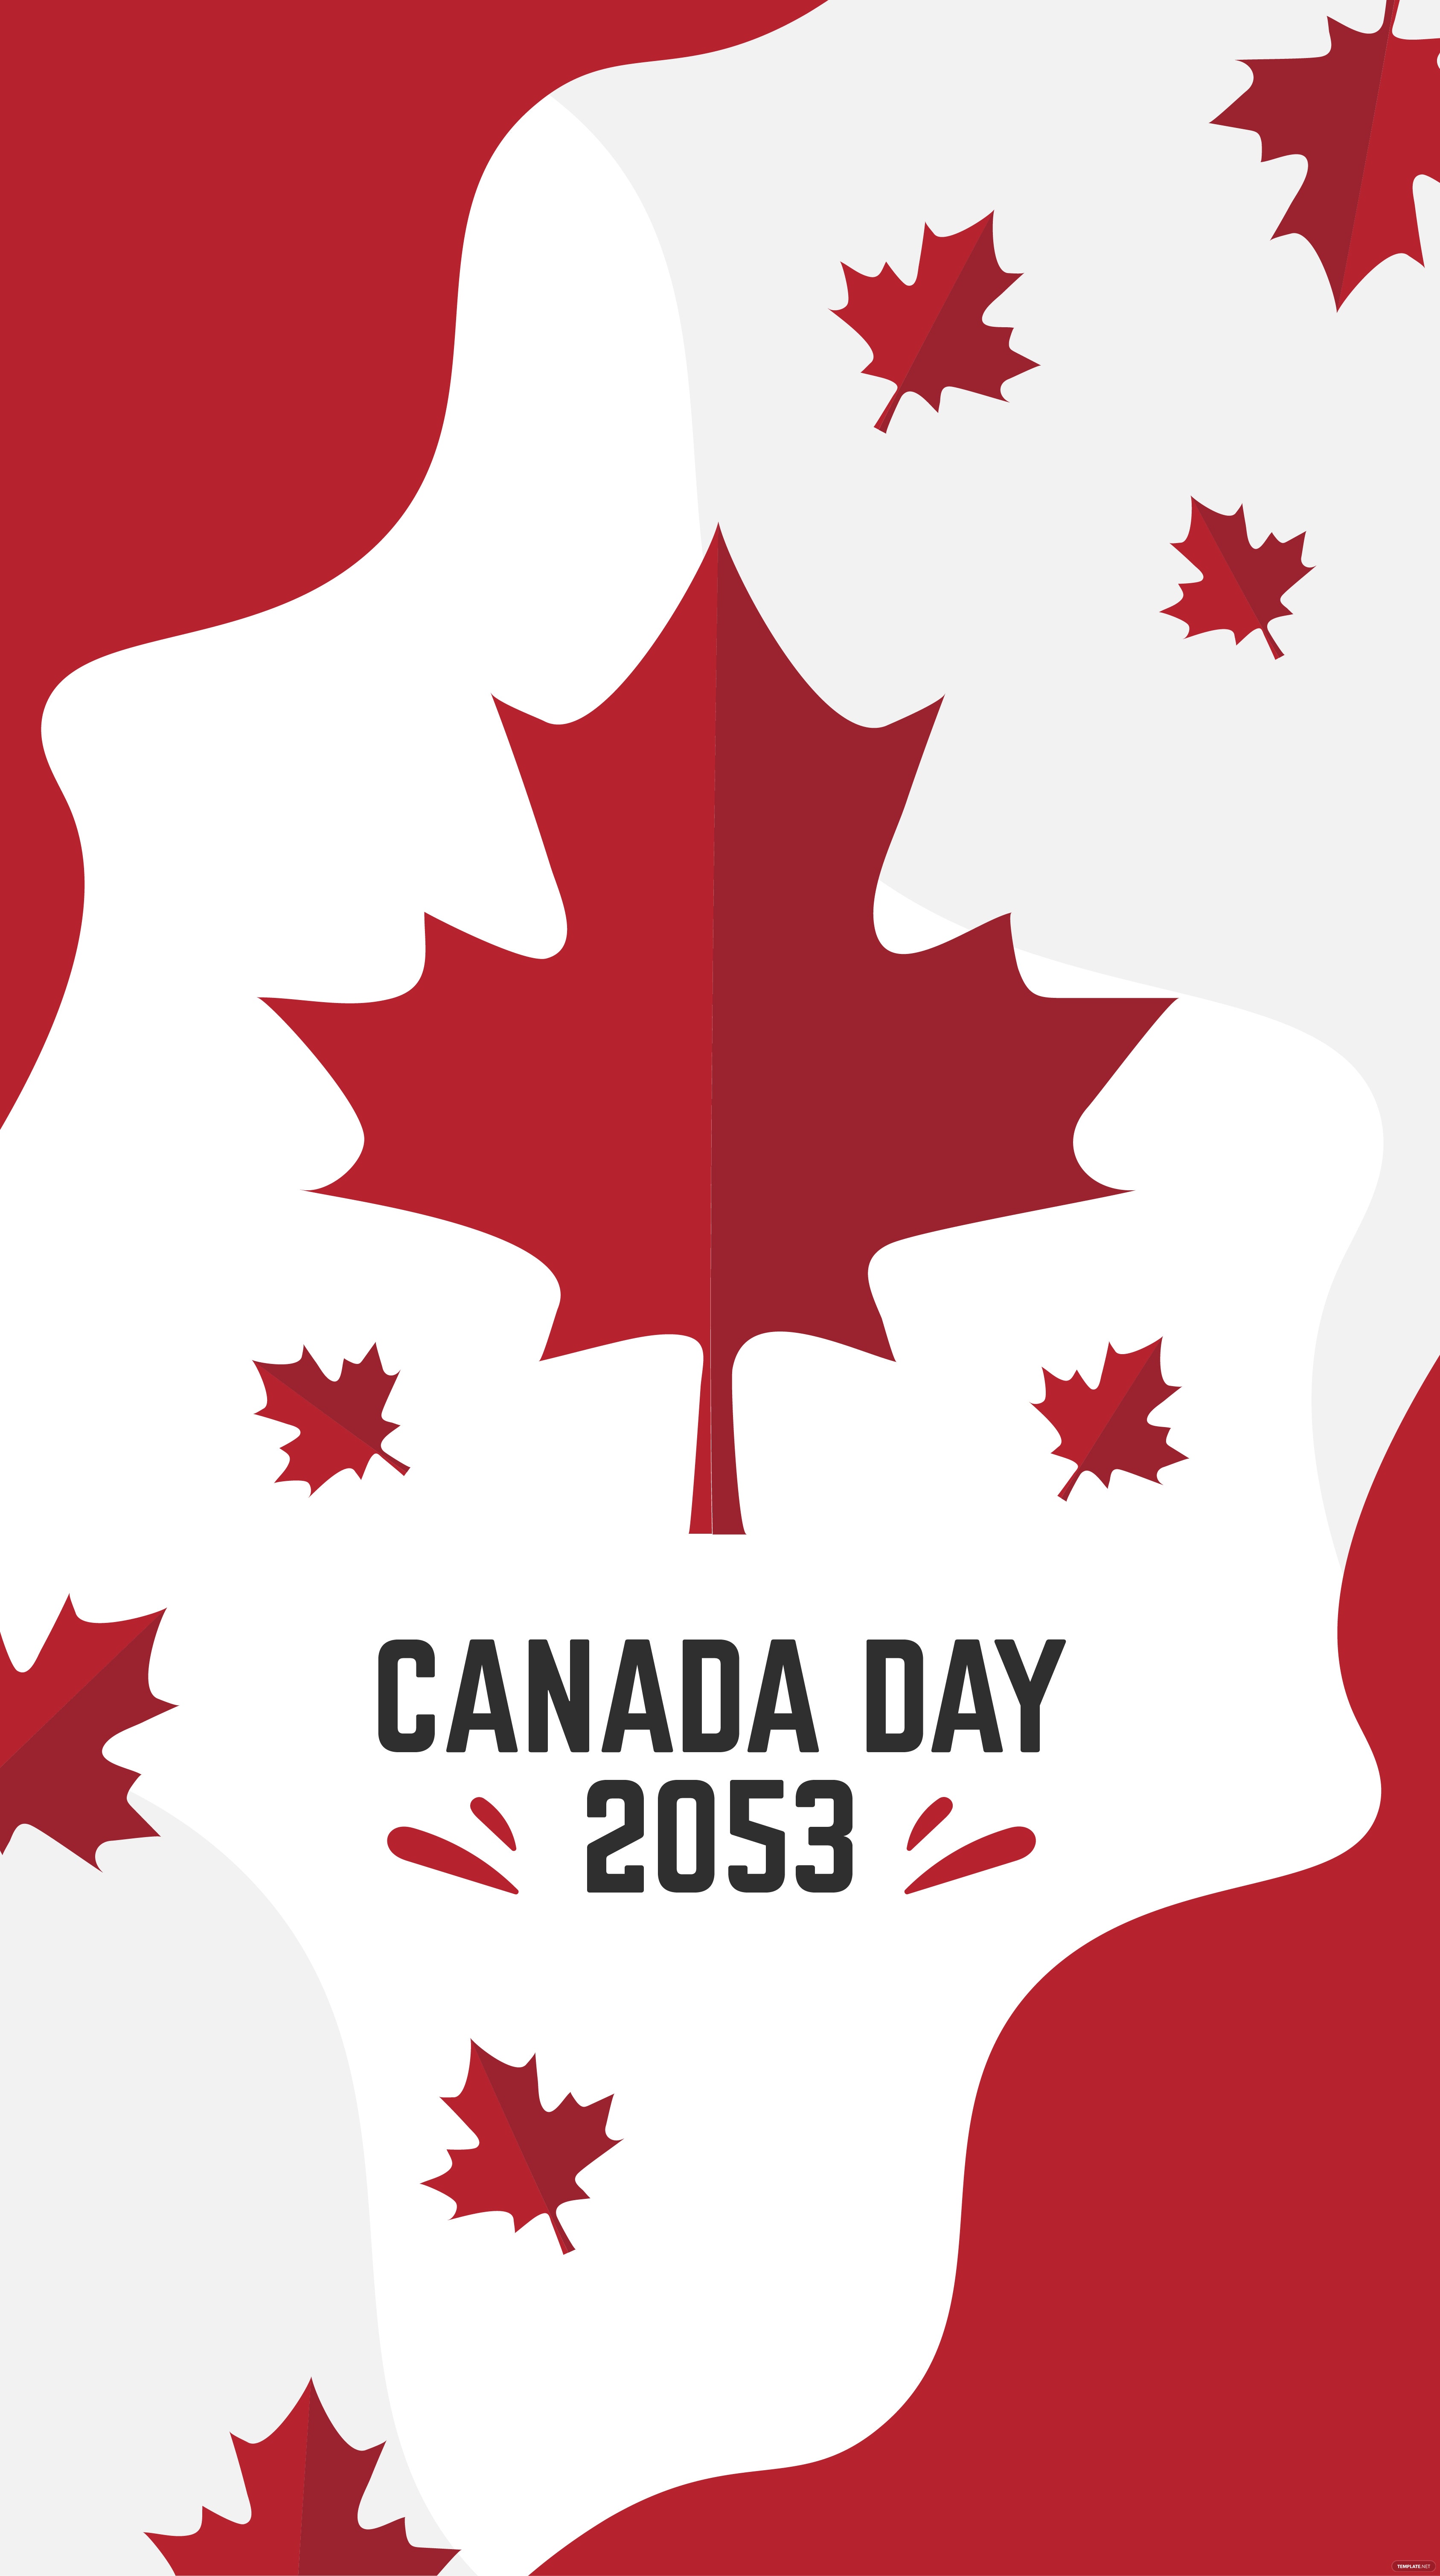 Free Canada Day iPhone Wallpaper, Illustrator, JPG, PNG, SVG